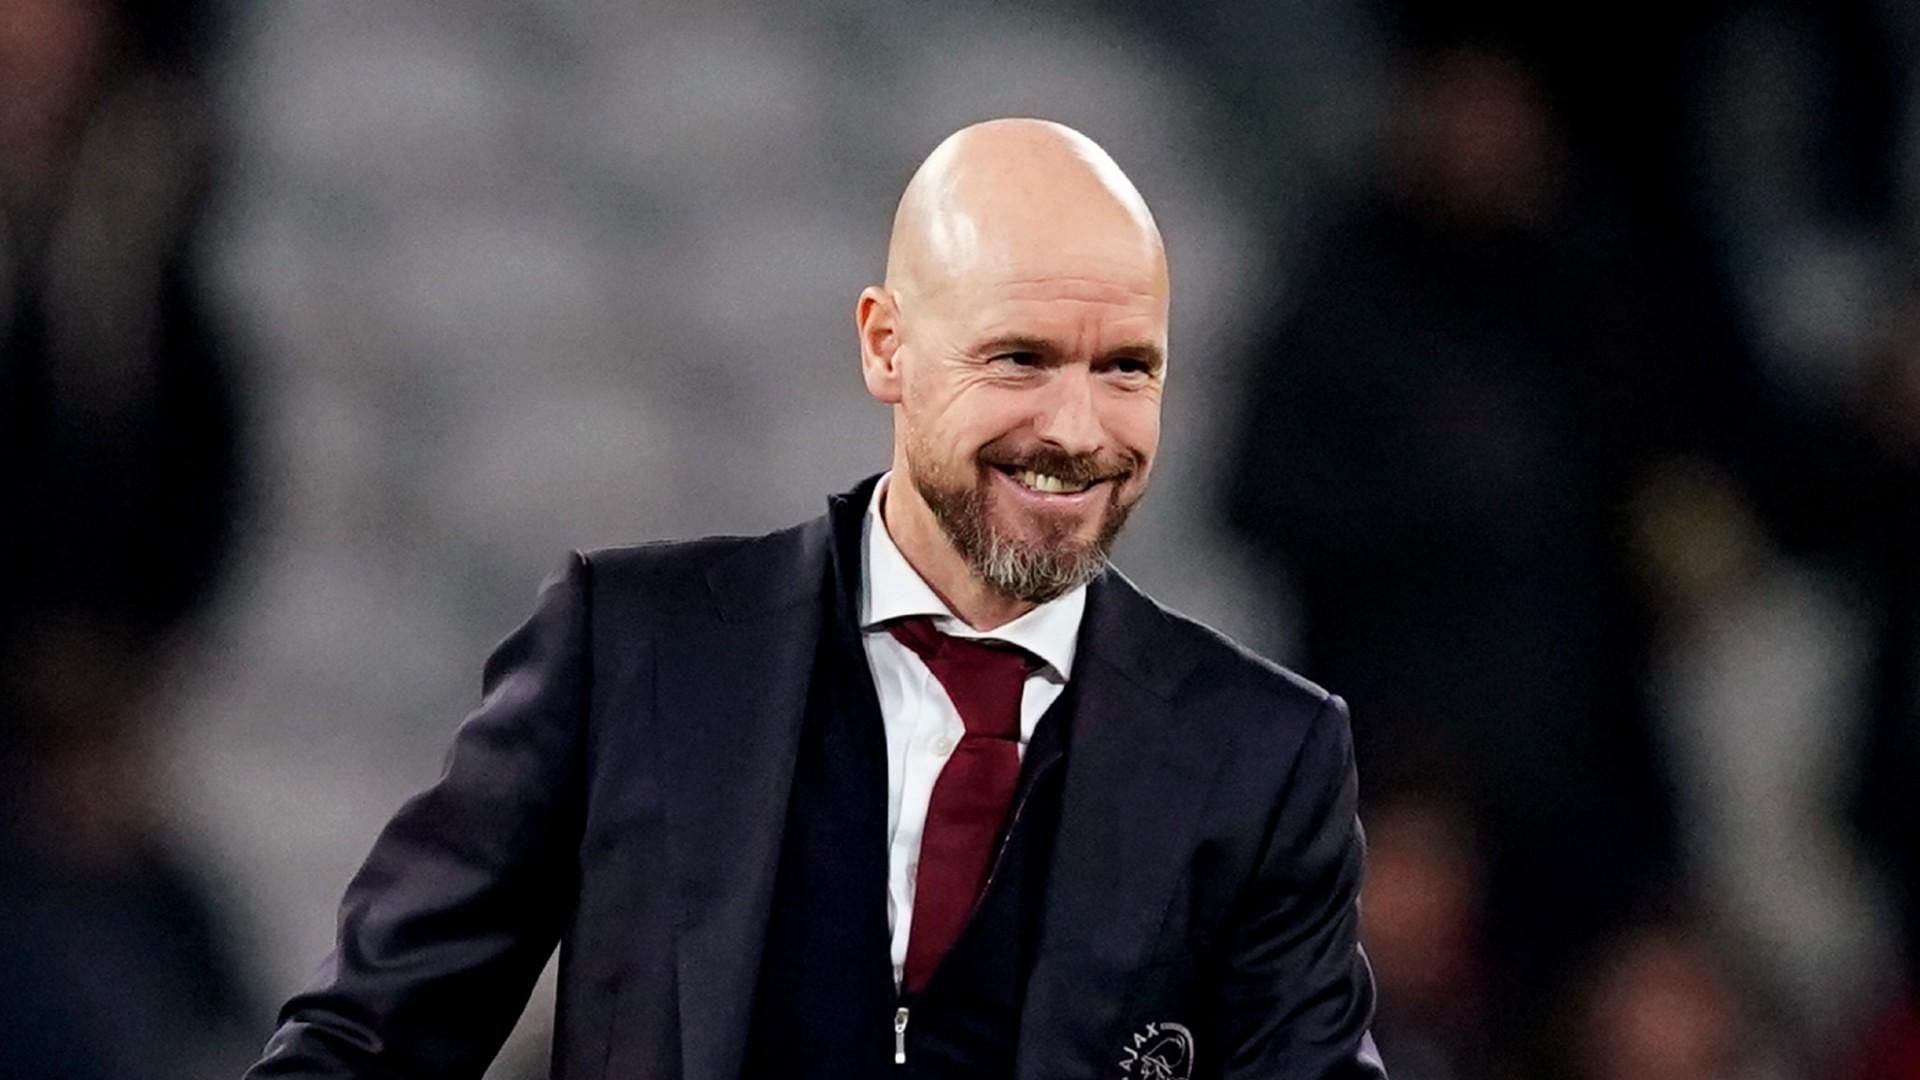 Manchester United manager Erik ten Hag (cred: Sporting News)